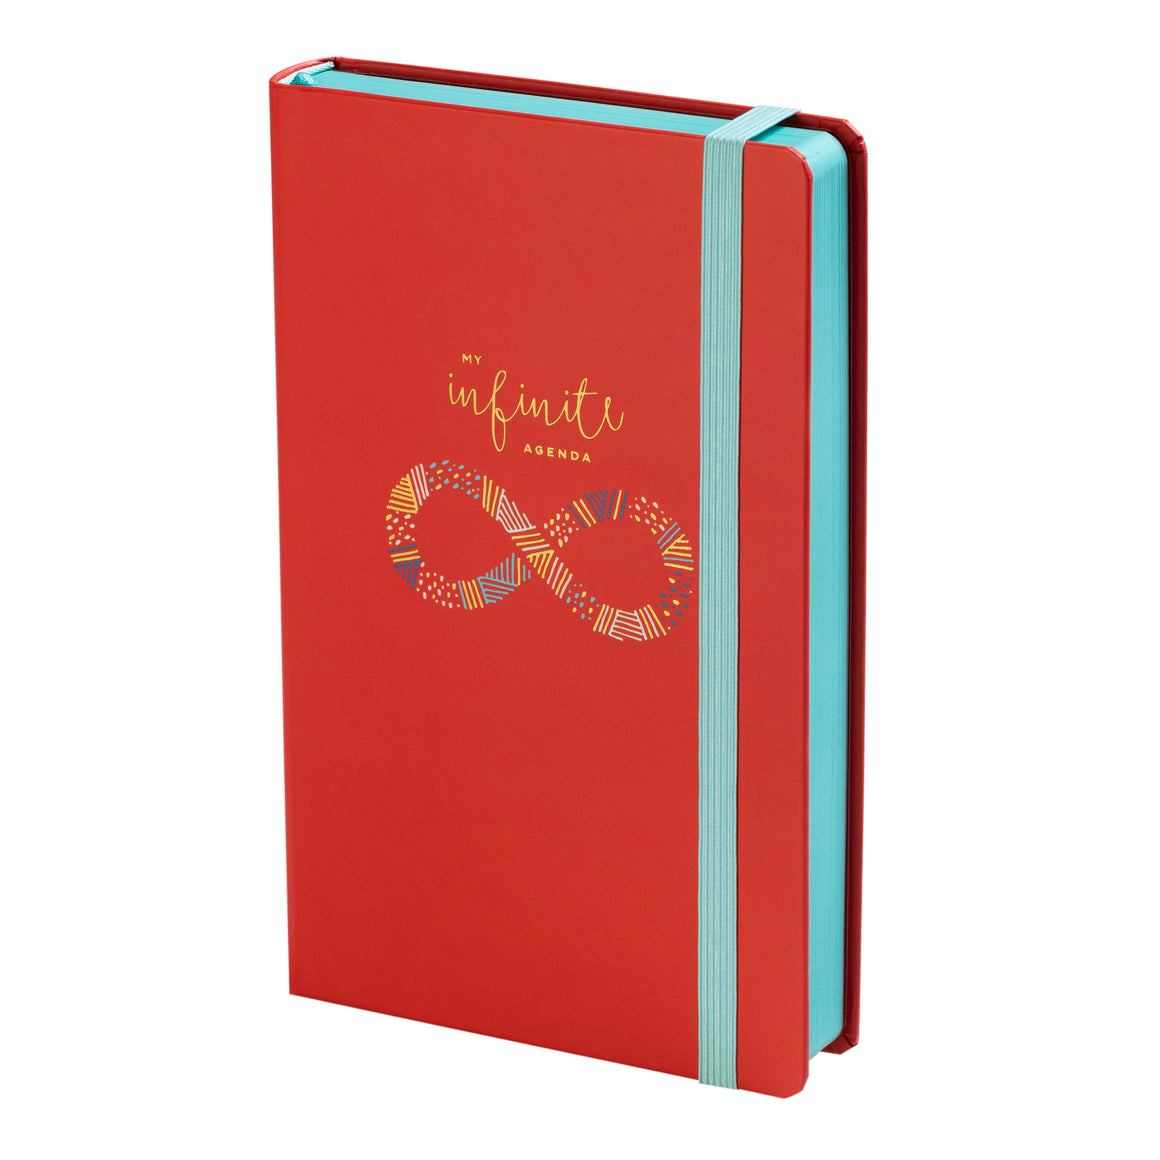 Undated - My Infinite Agenda - Coral with Teal (180 Days) - 5" x 8.25", $29